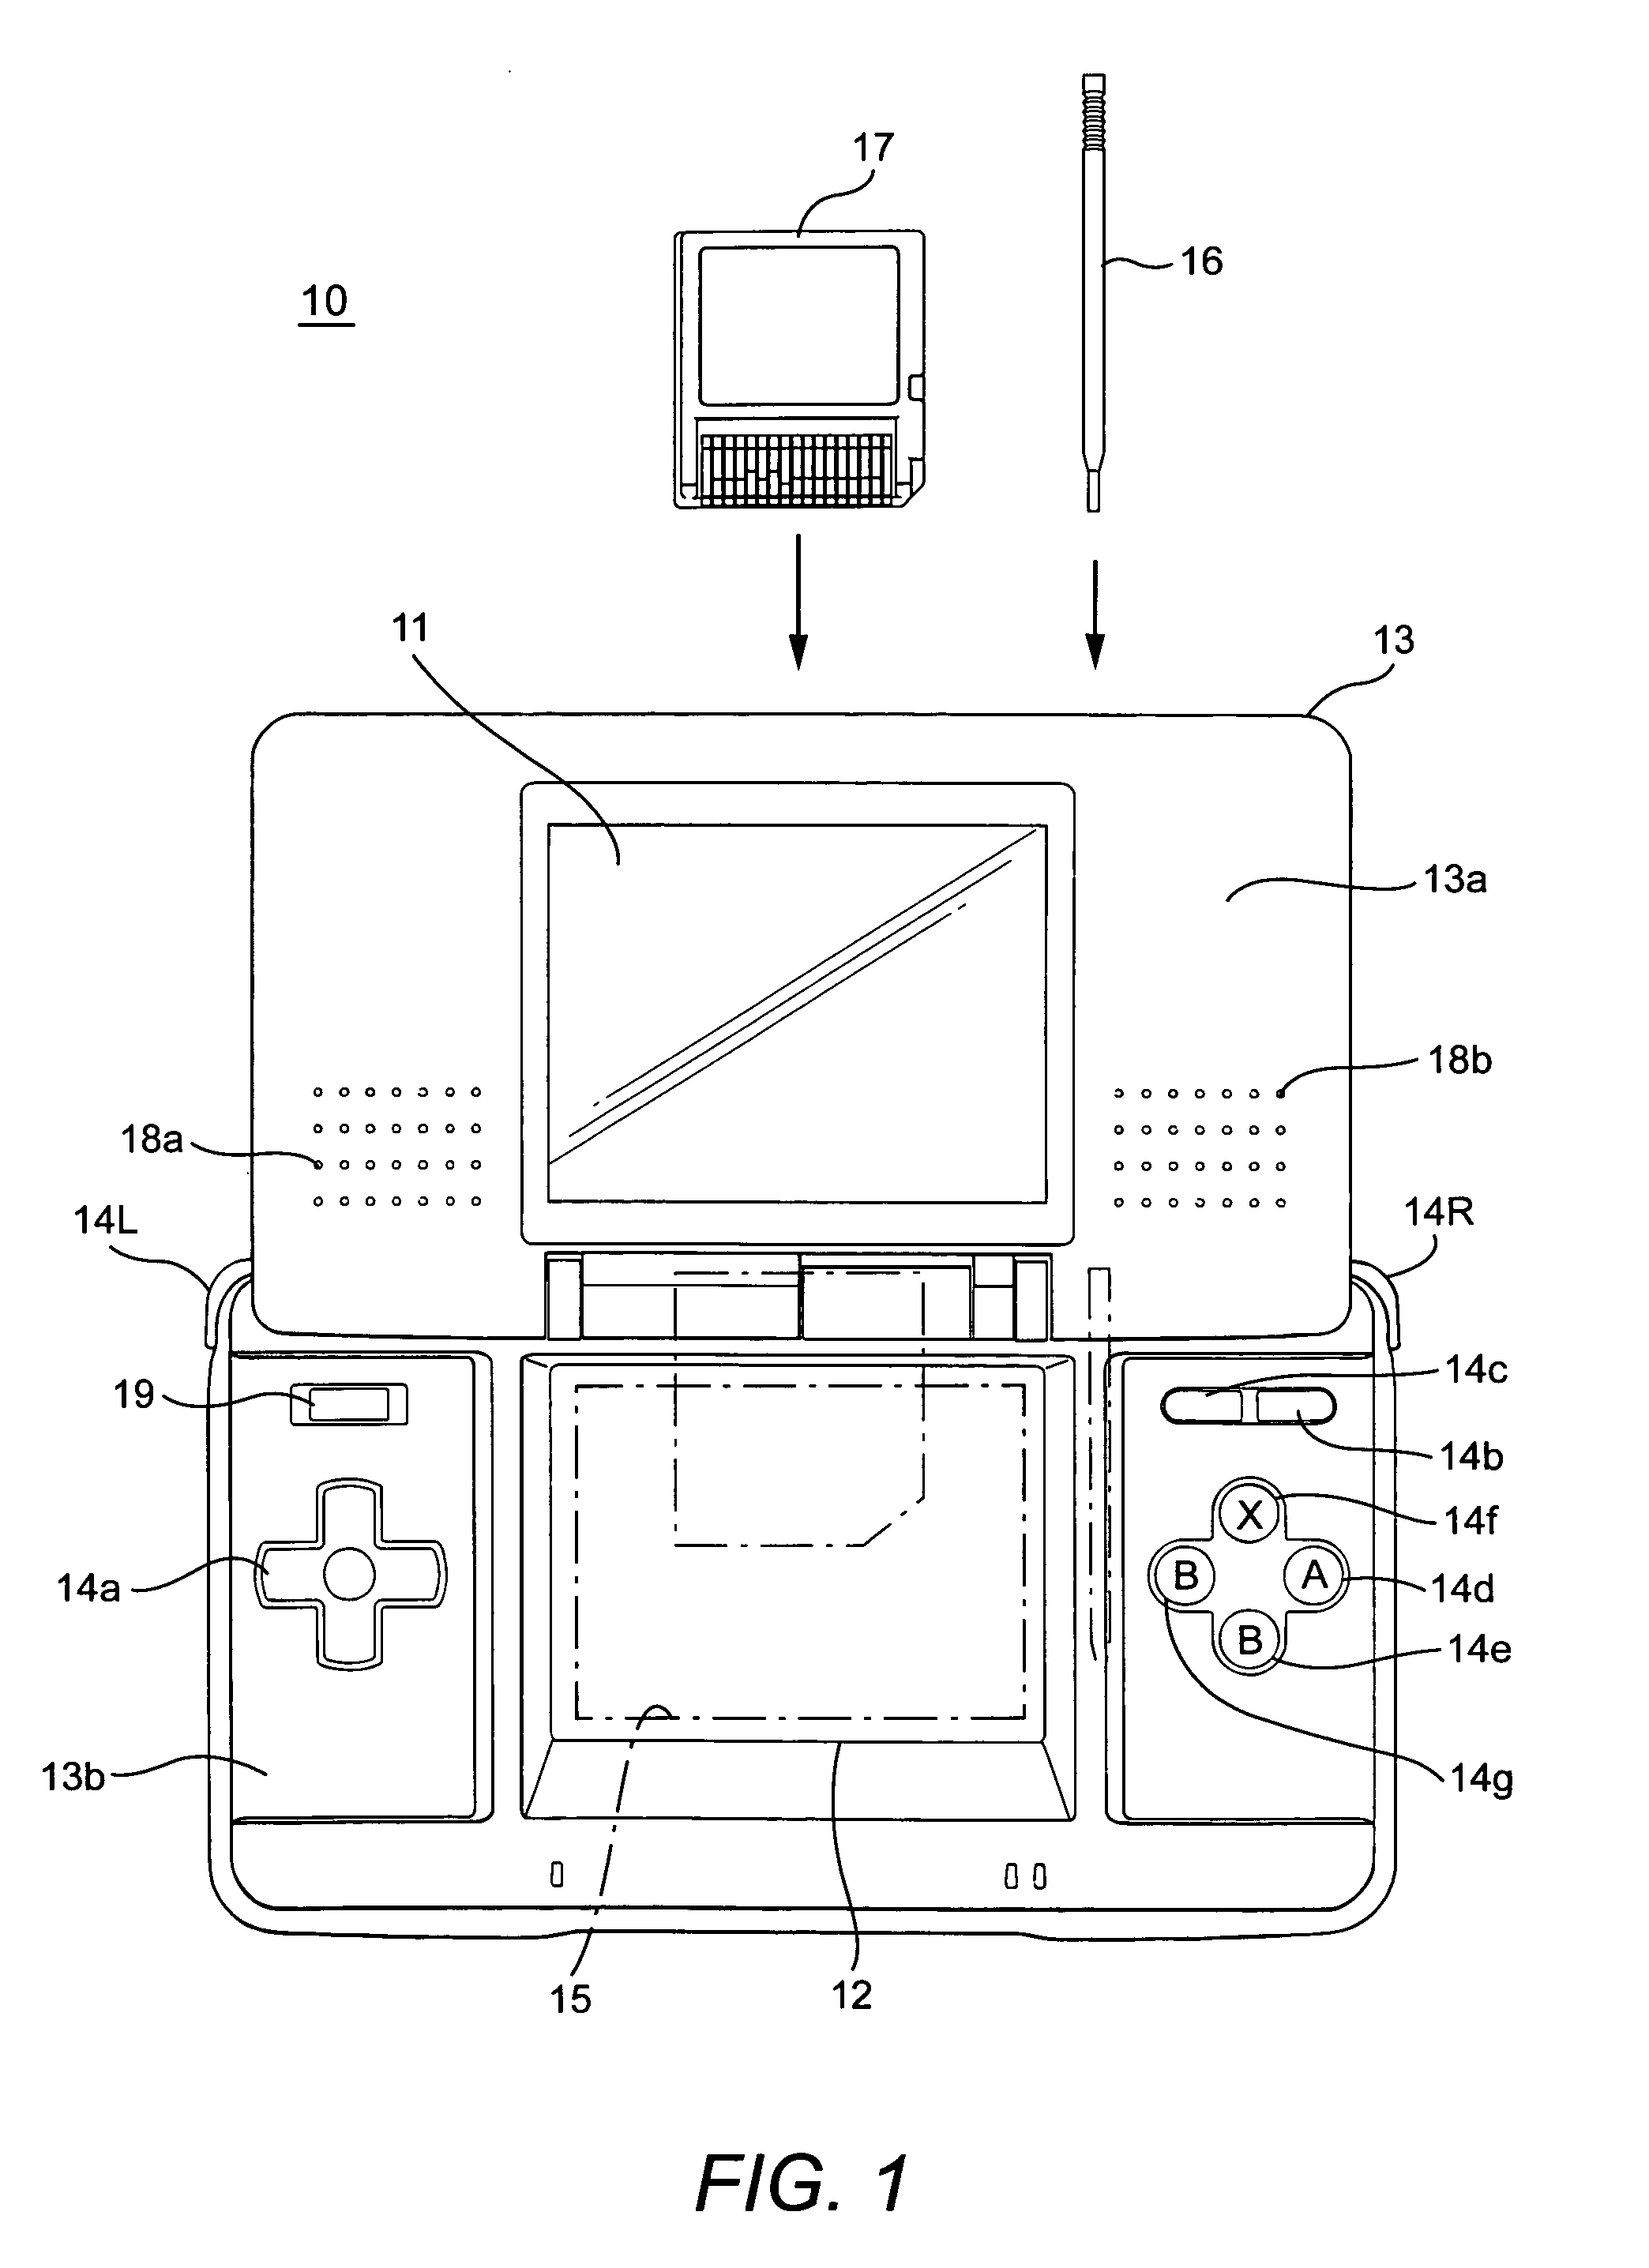 Method and apparatus for distributing data to a plurality of game devices